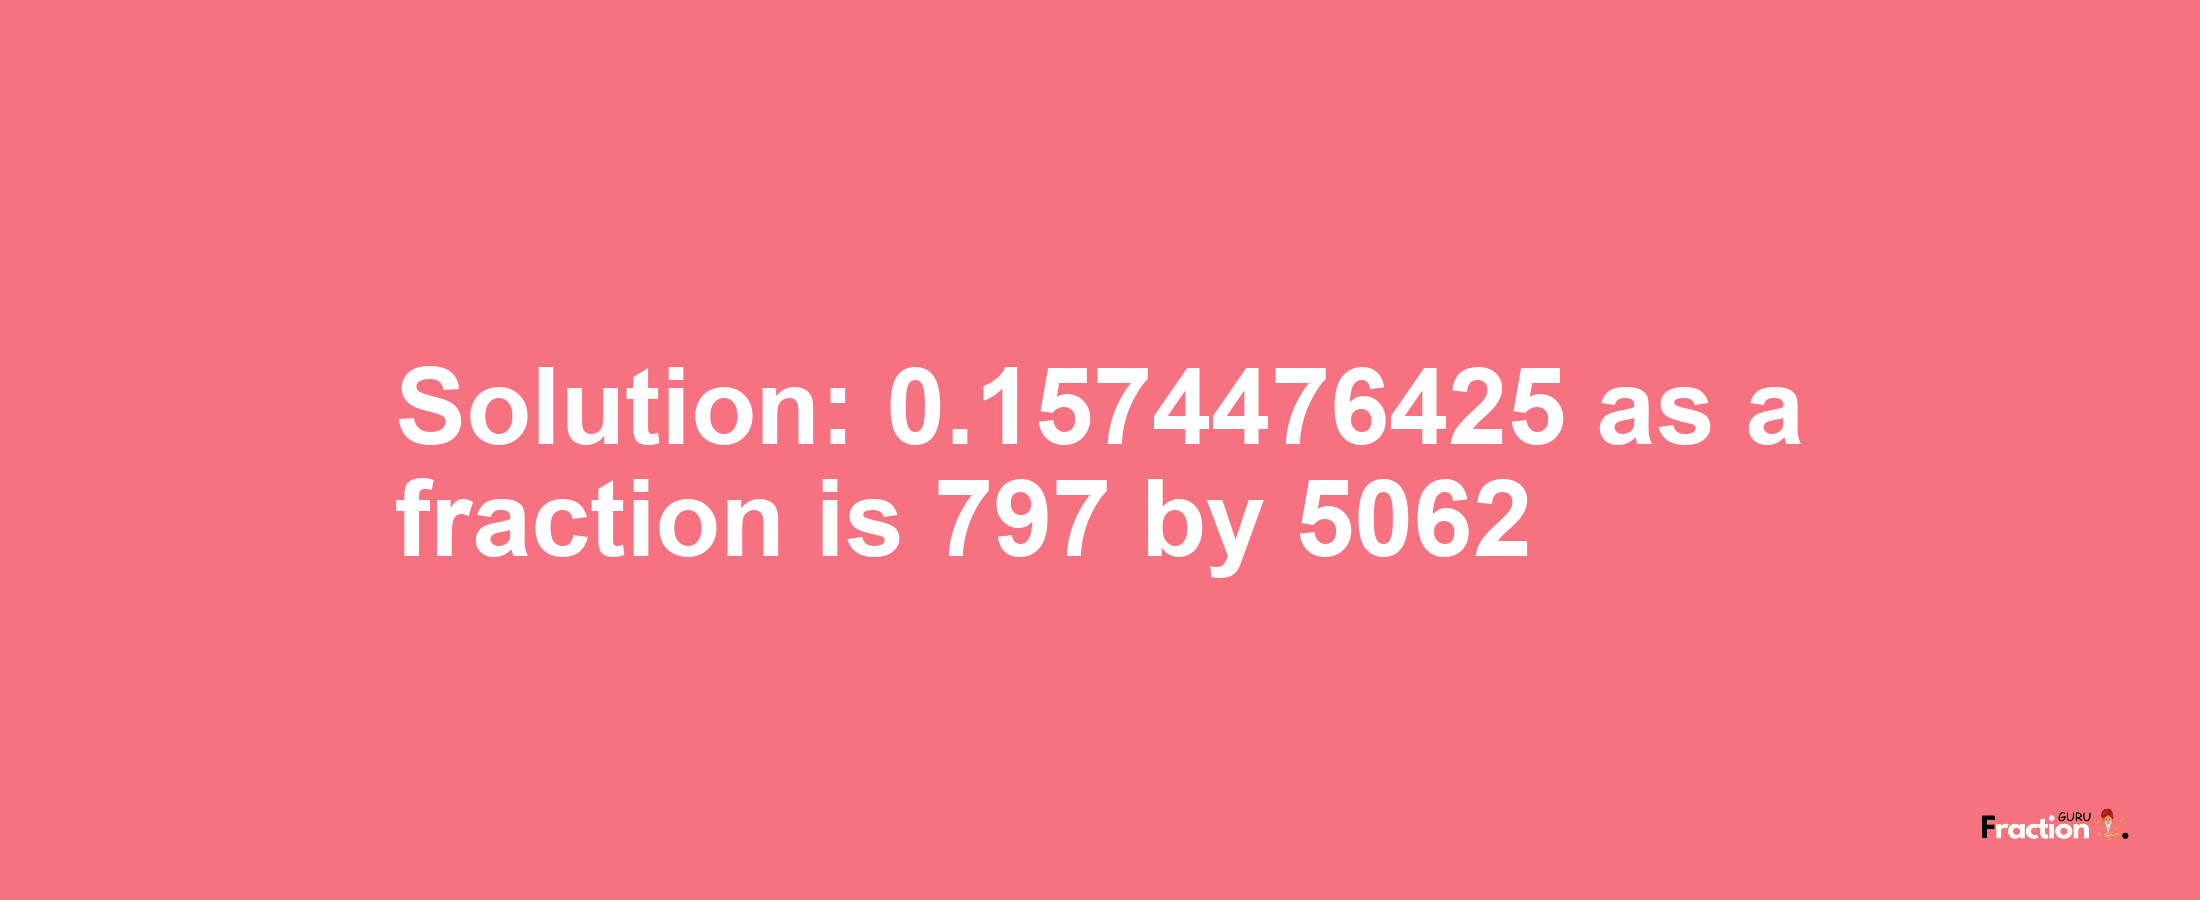 Solution:0.1574476425 as a fraction is 797/5062